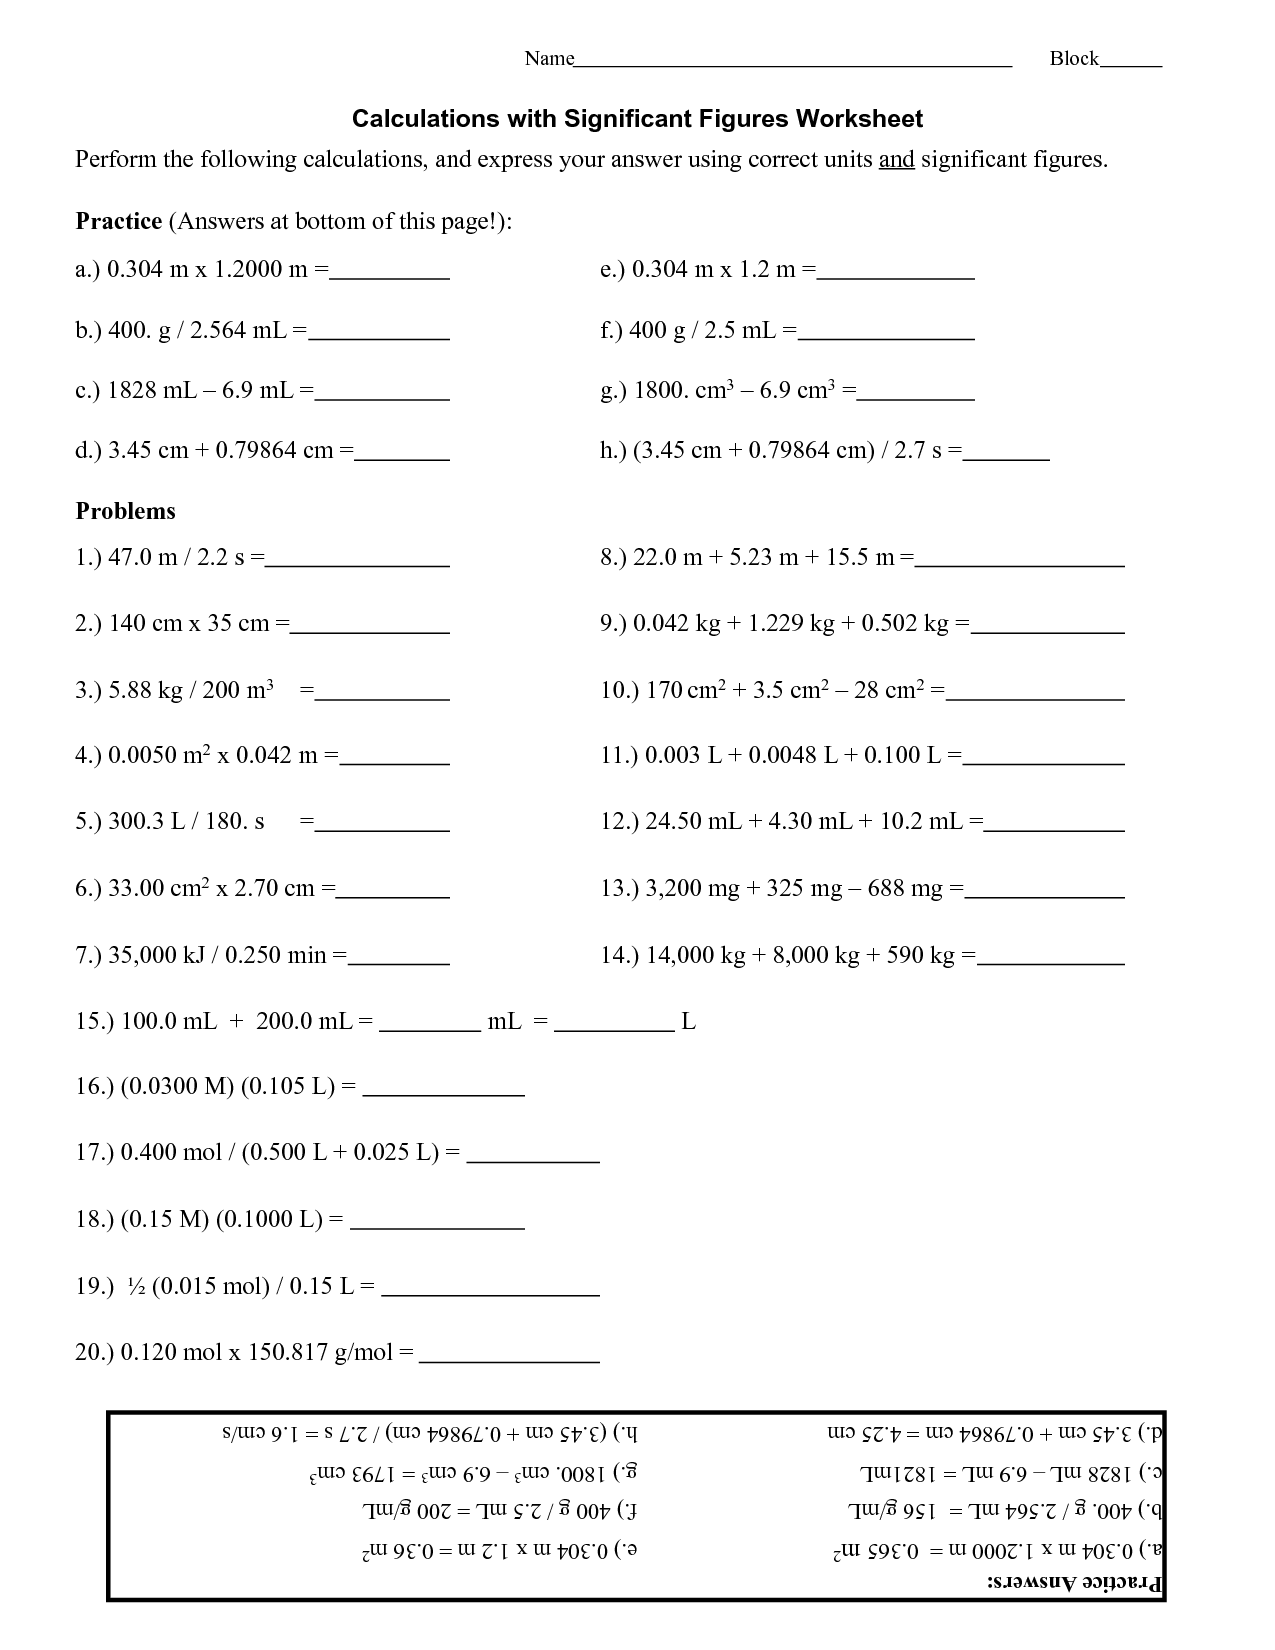 8-best-images-of-significant-figures-worksheet-with-answer-key-significant-figures-worksheet